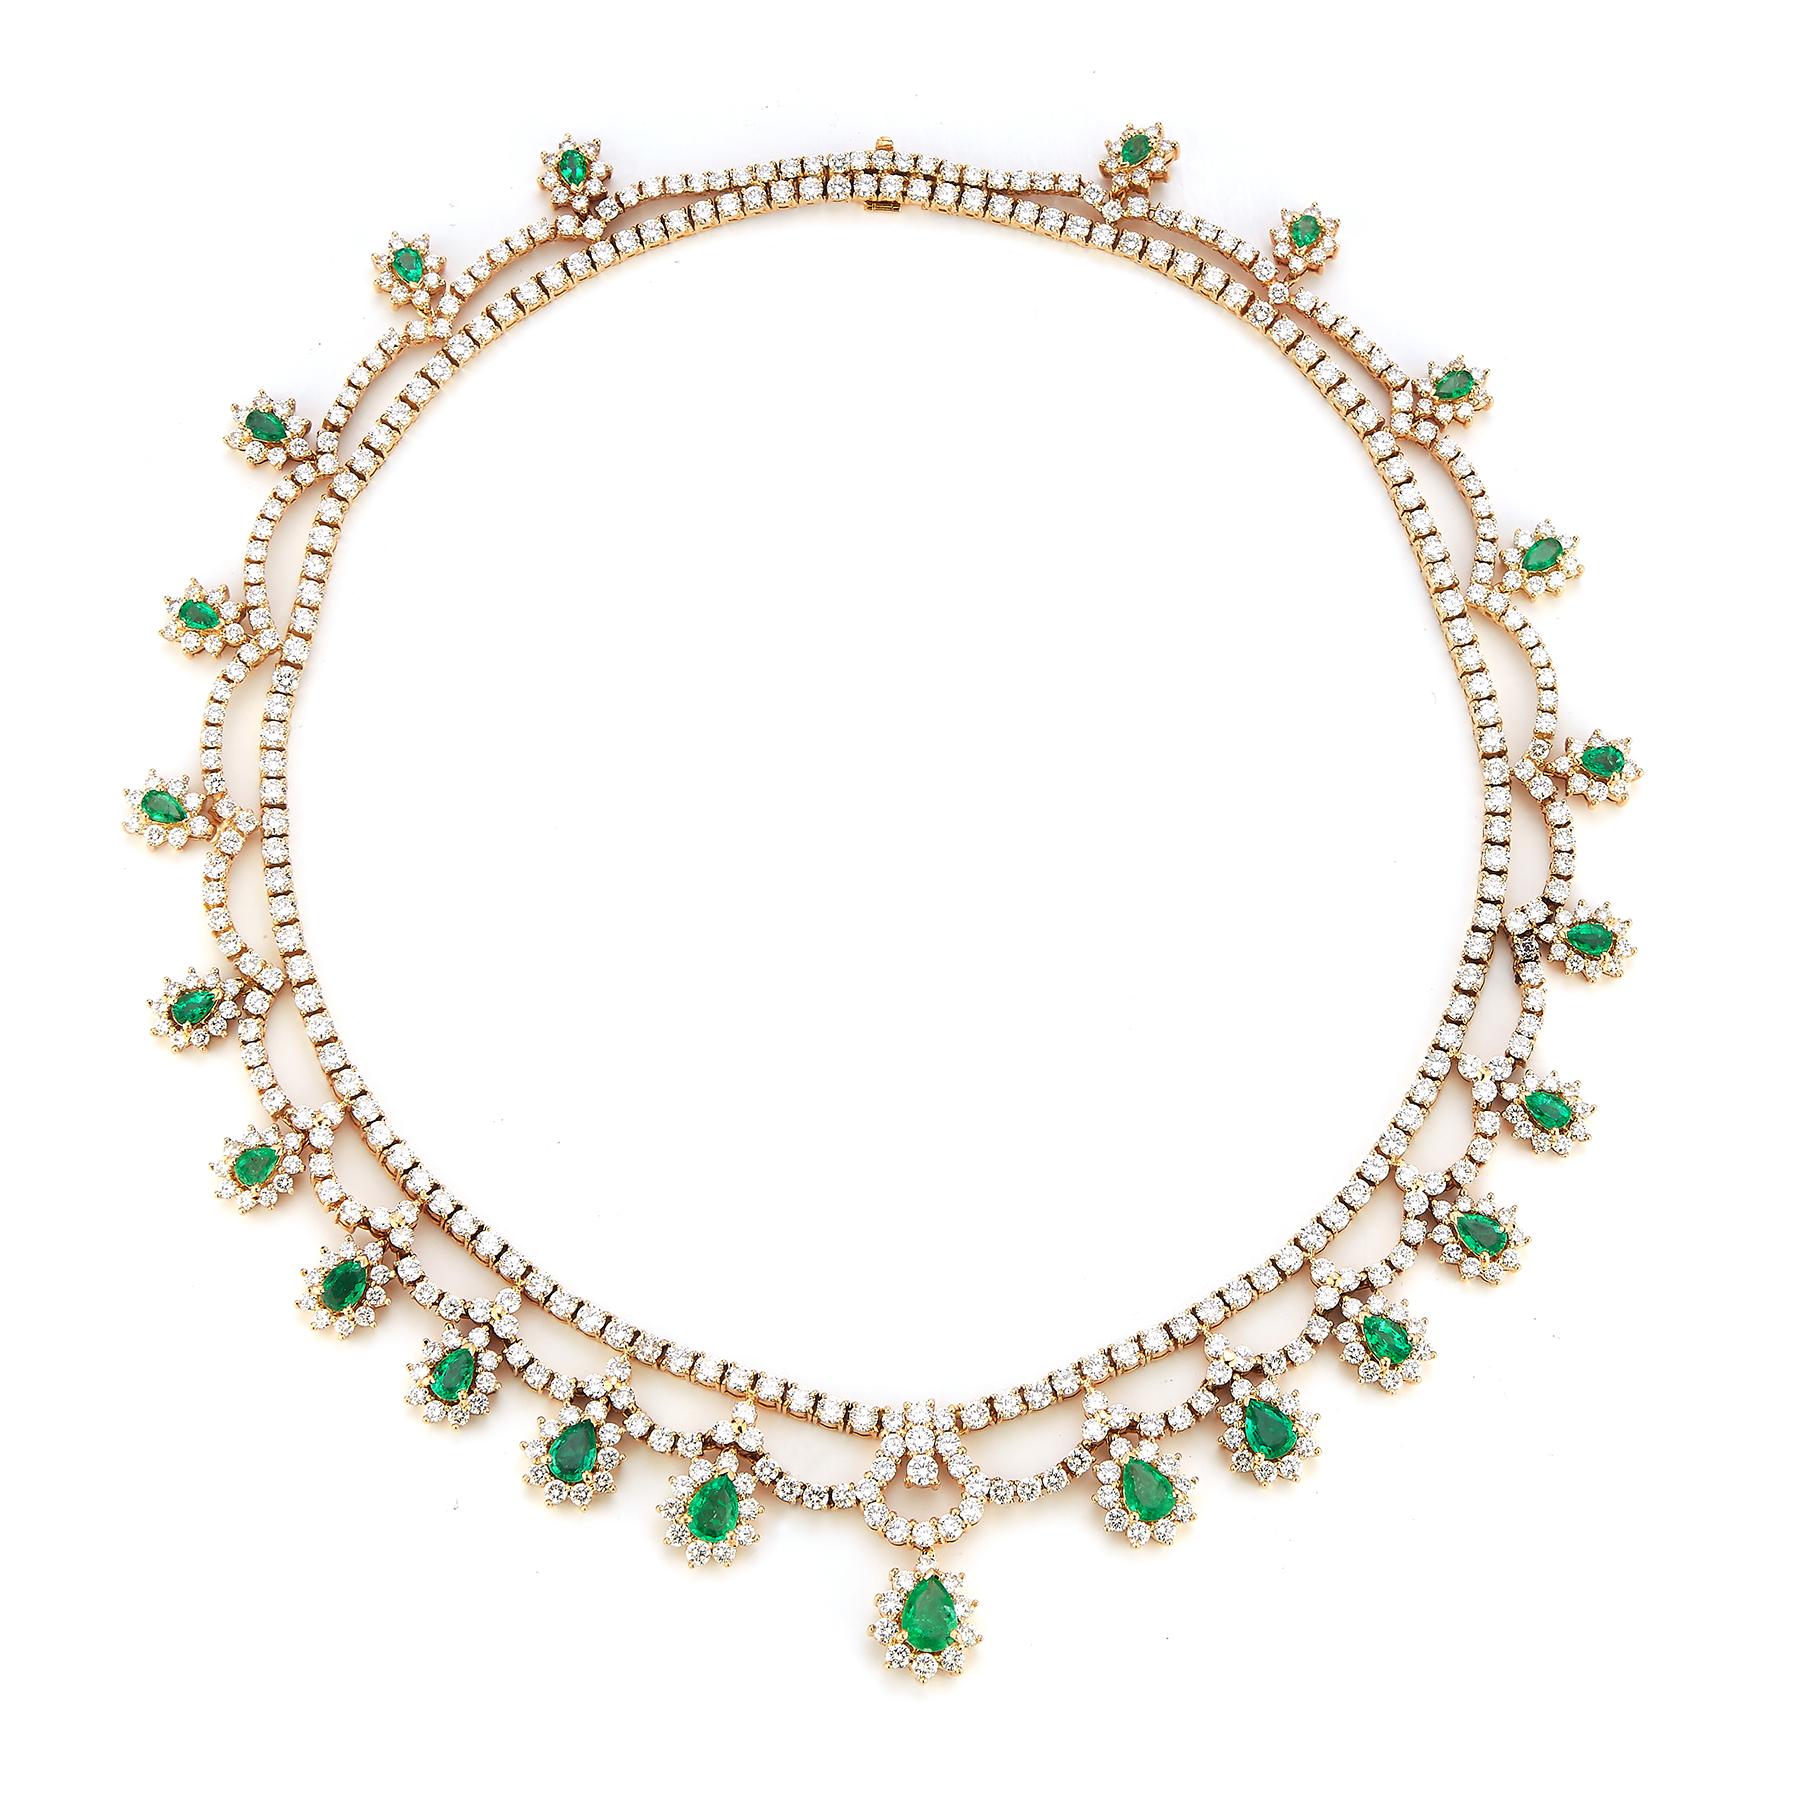 Magnificent Emerald & Diamond Necklace
Emerald necklace with 23 pear shaped emeralds approximately 9.60 cts.  
538 round diamonds approximately 28.45 cts 
18k yellow gold

Measurements: 16